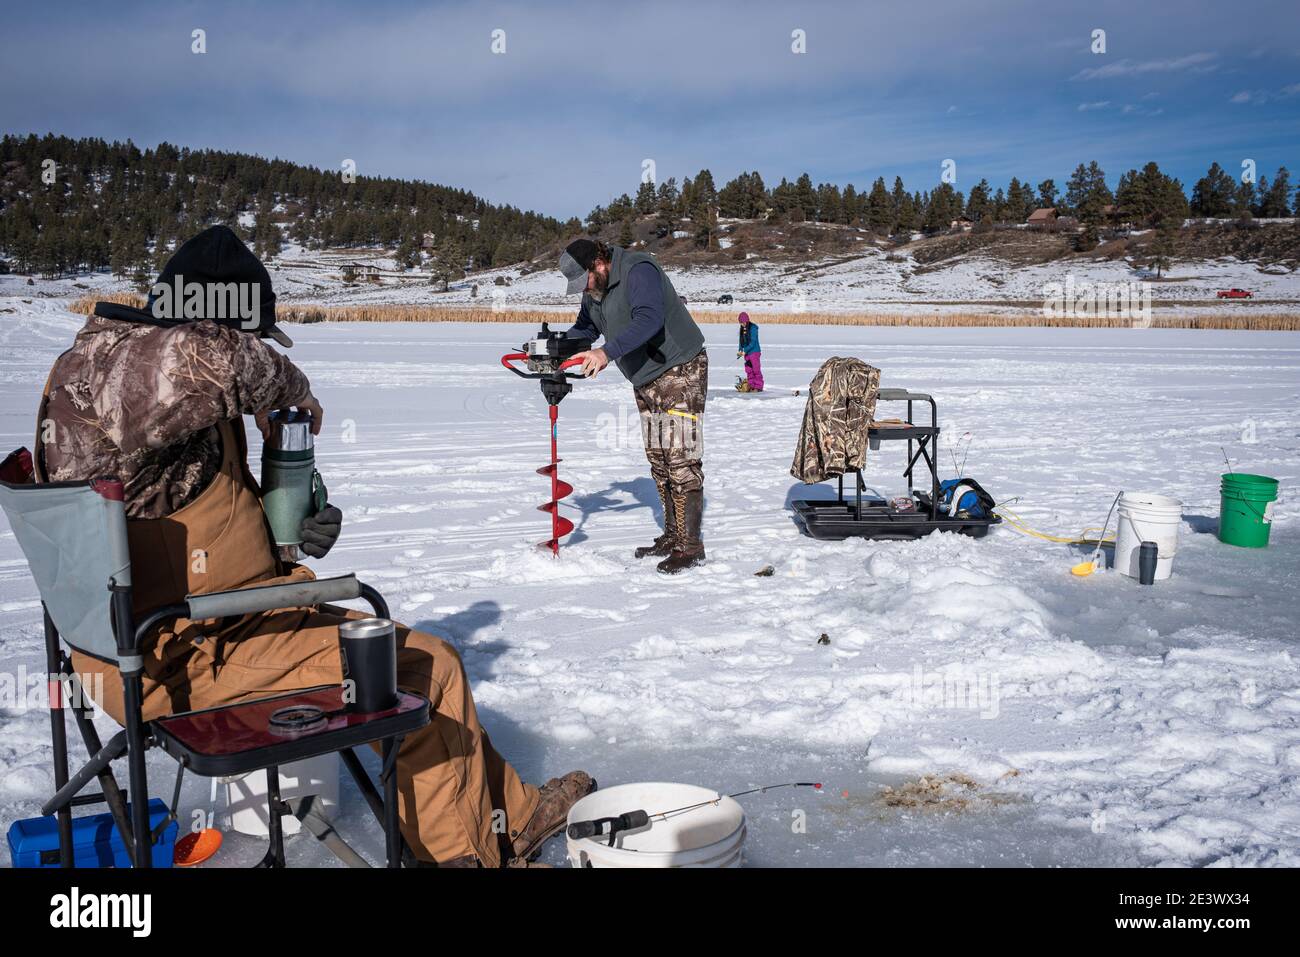 Three people ice fishing on a frozen lake. One sits in a chair pouring  coffee, a man drills a hole in the ice, and a woman fishes with a pink pole  Stock